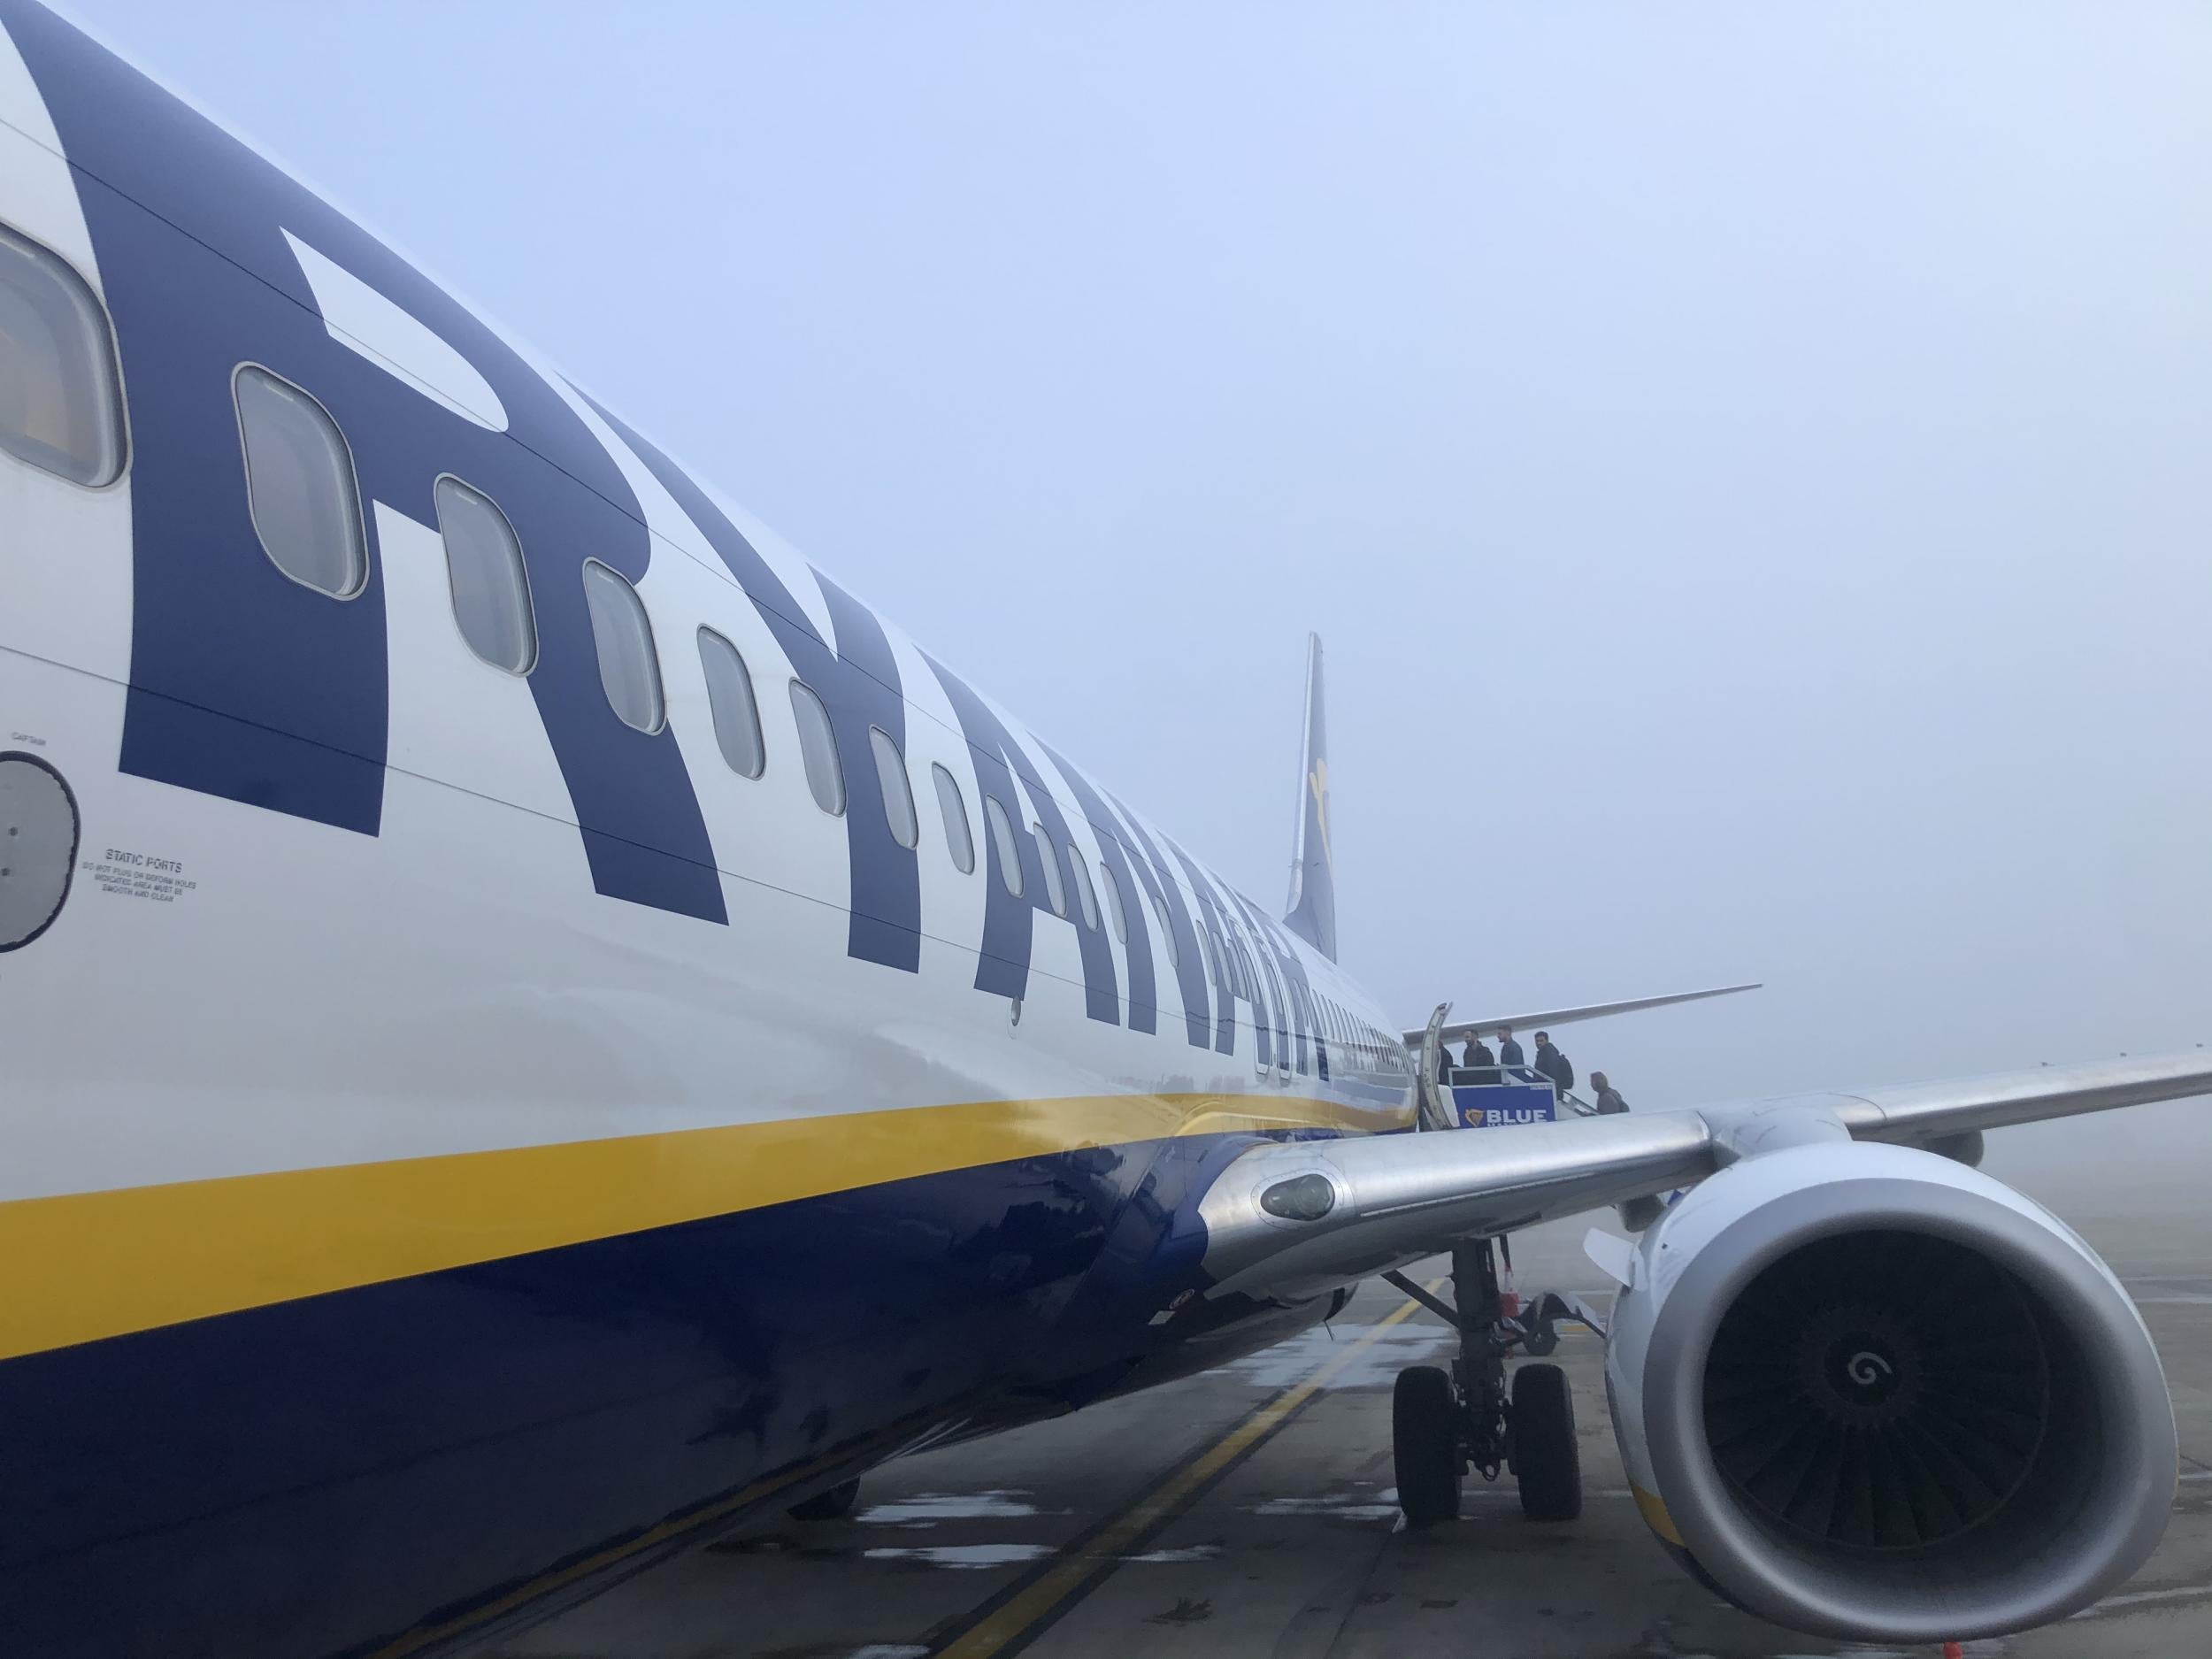 Foggy outlook: the aviation industry is uncertain about the future